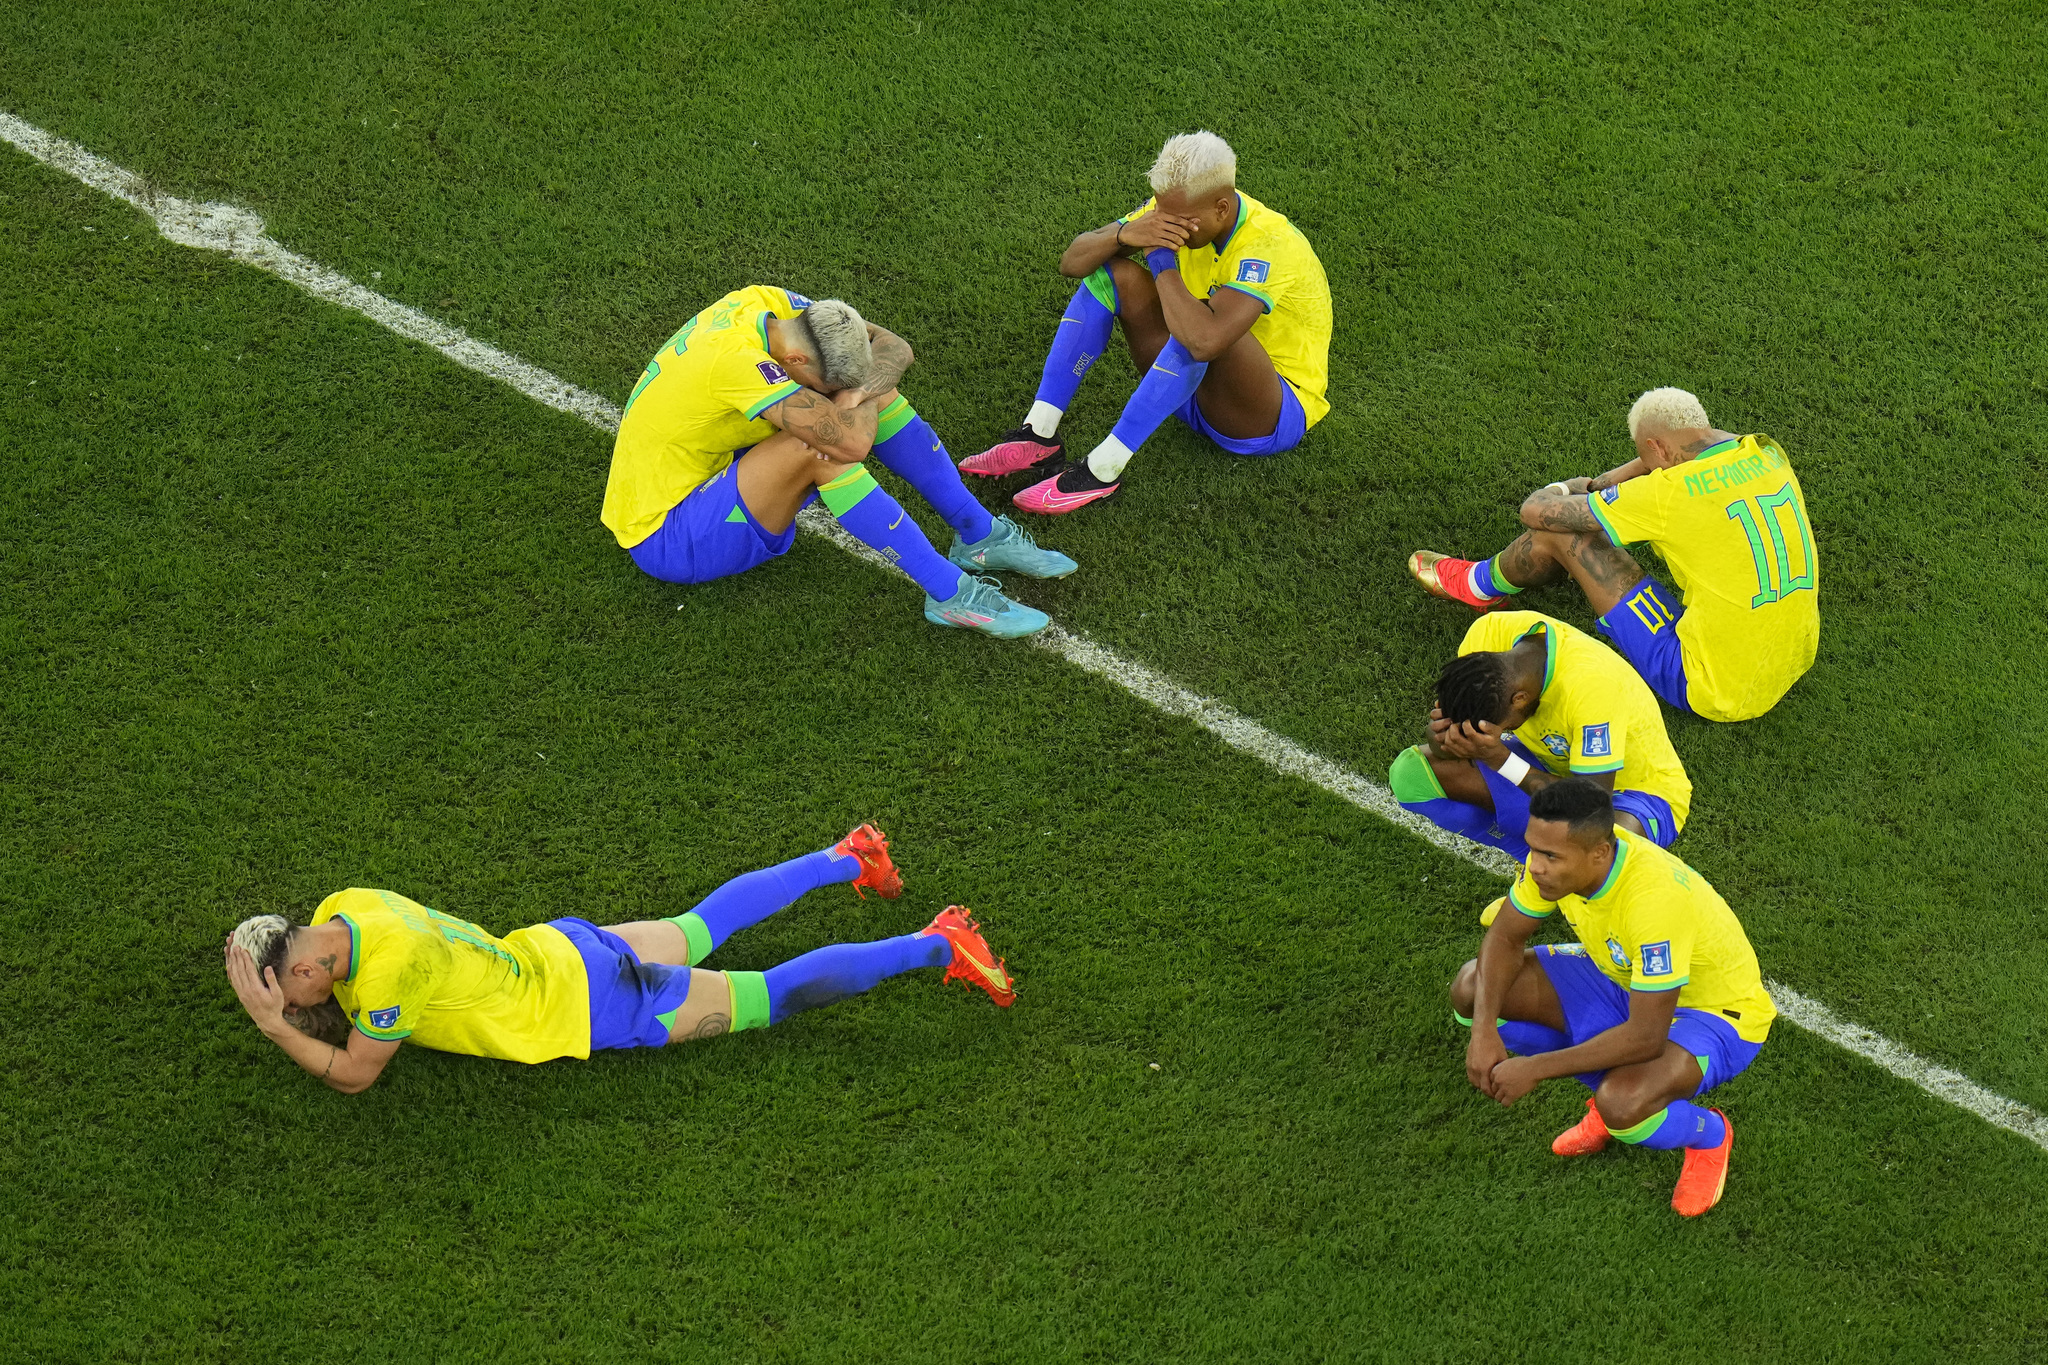 Brazil's players are dejected after losing the World Cup quarterfinal soccer match between  lt;HIT gt;Croatia lt;/HIT gt; and Brazil, at the Education City Stadium in Al Rayyan, Qatar, Friday, Dec. 9, 2022. (AP Photo/Petr David Josek)